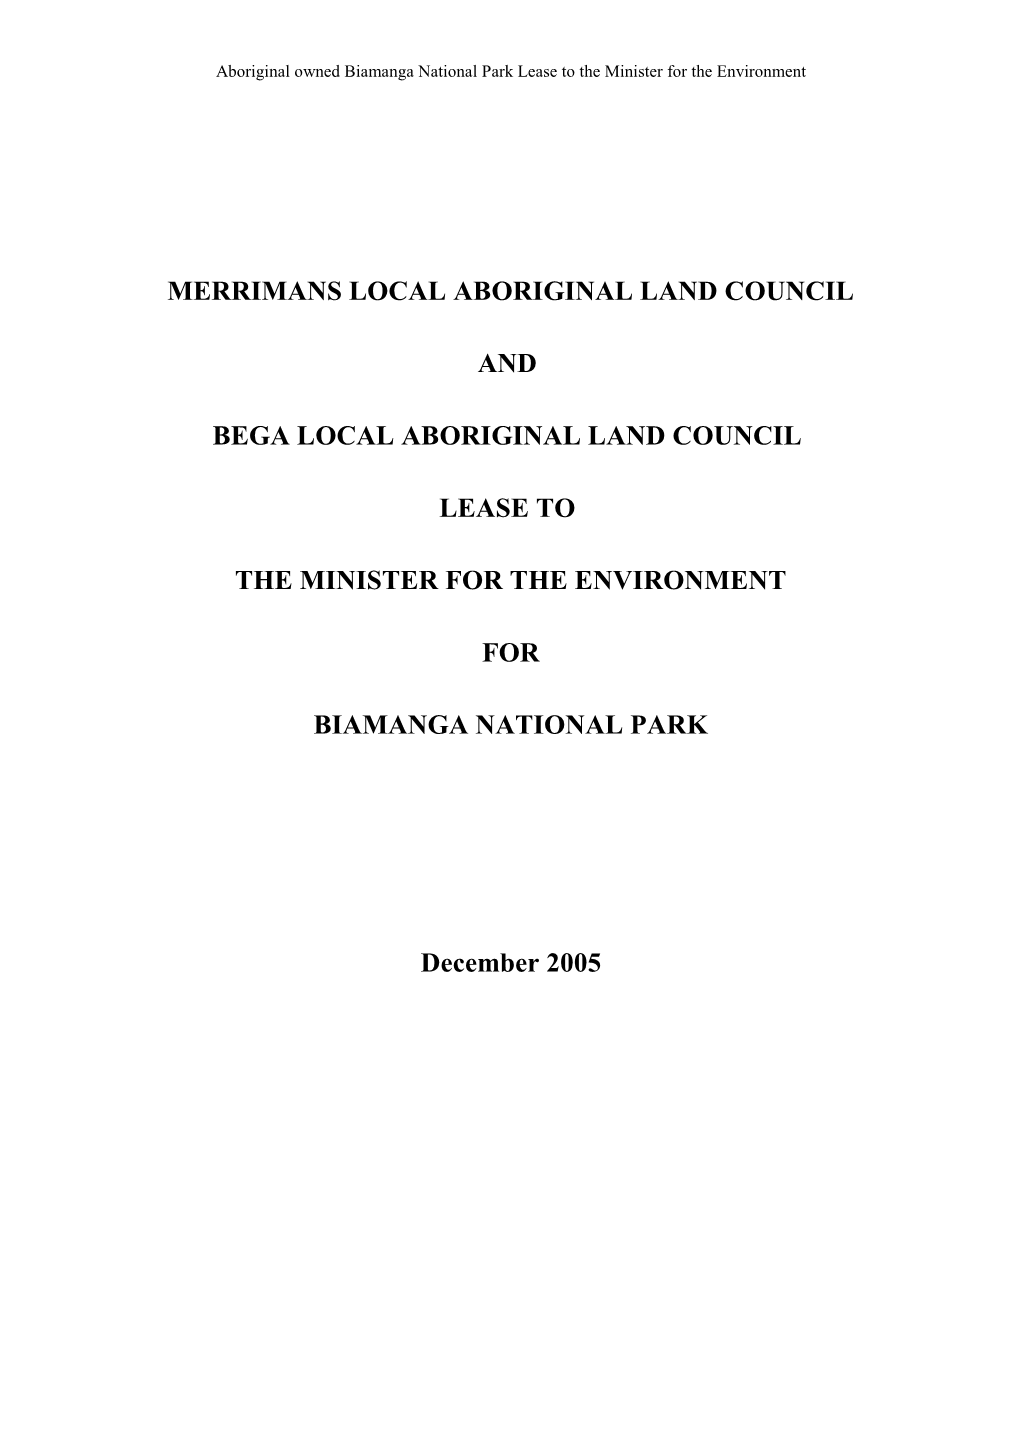 Merrimans and Bega Local Aboriginal Land Councils Lease to the Minister for the Environment Table of Contents